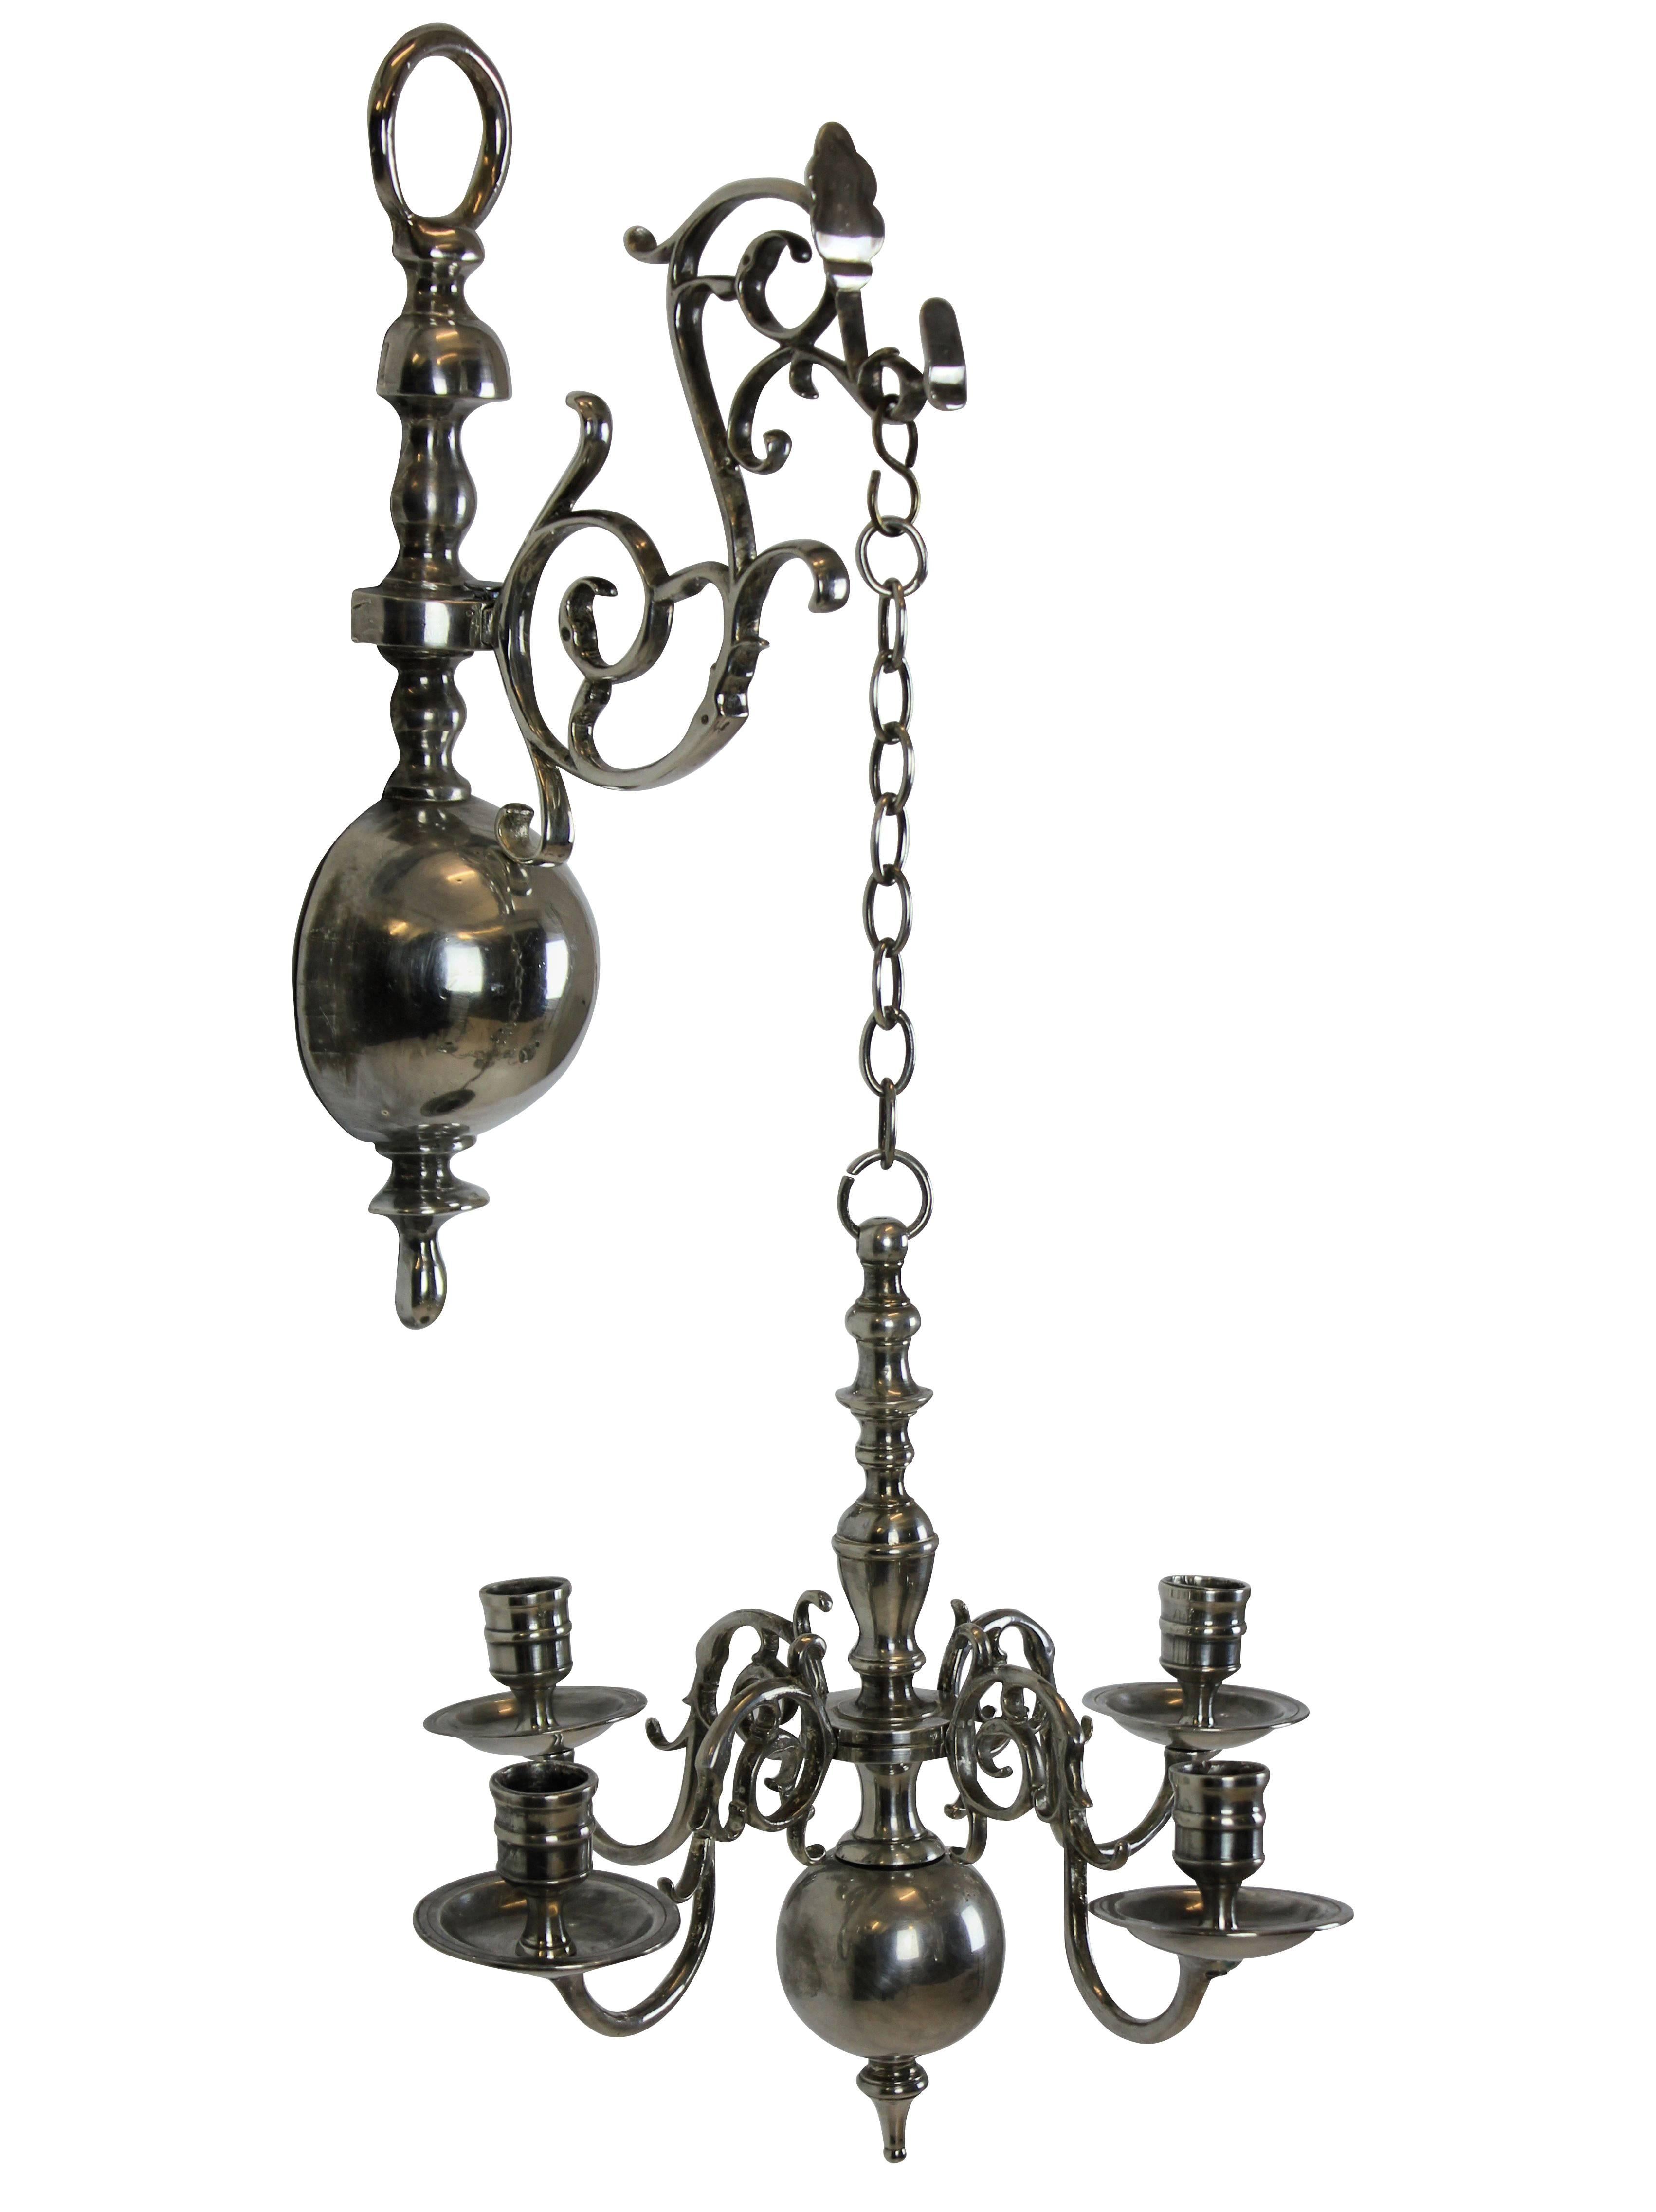 Early 19th Century Pair of English Silver Wall Chandeliers